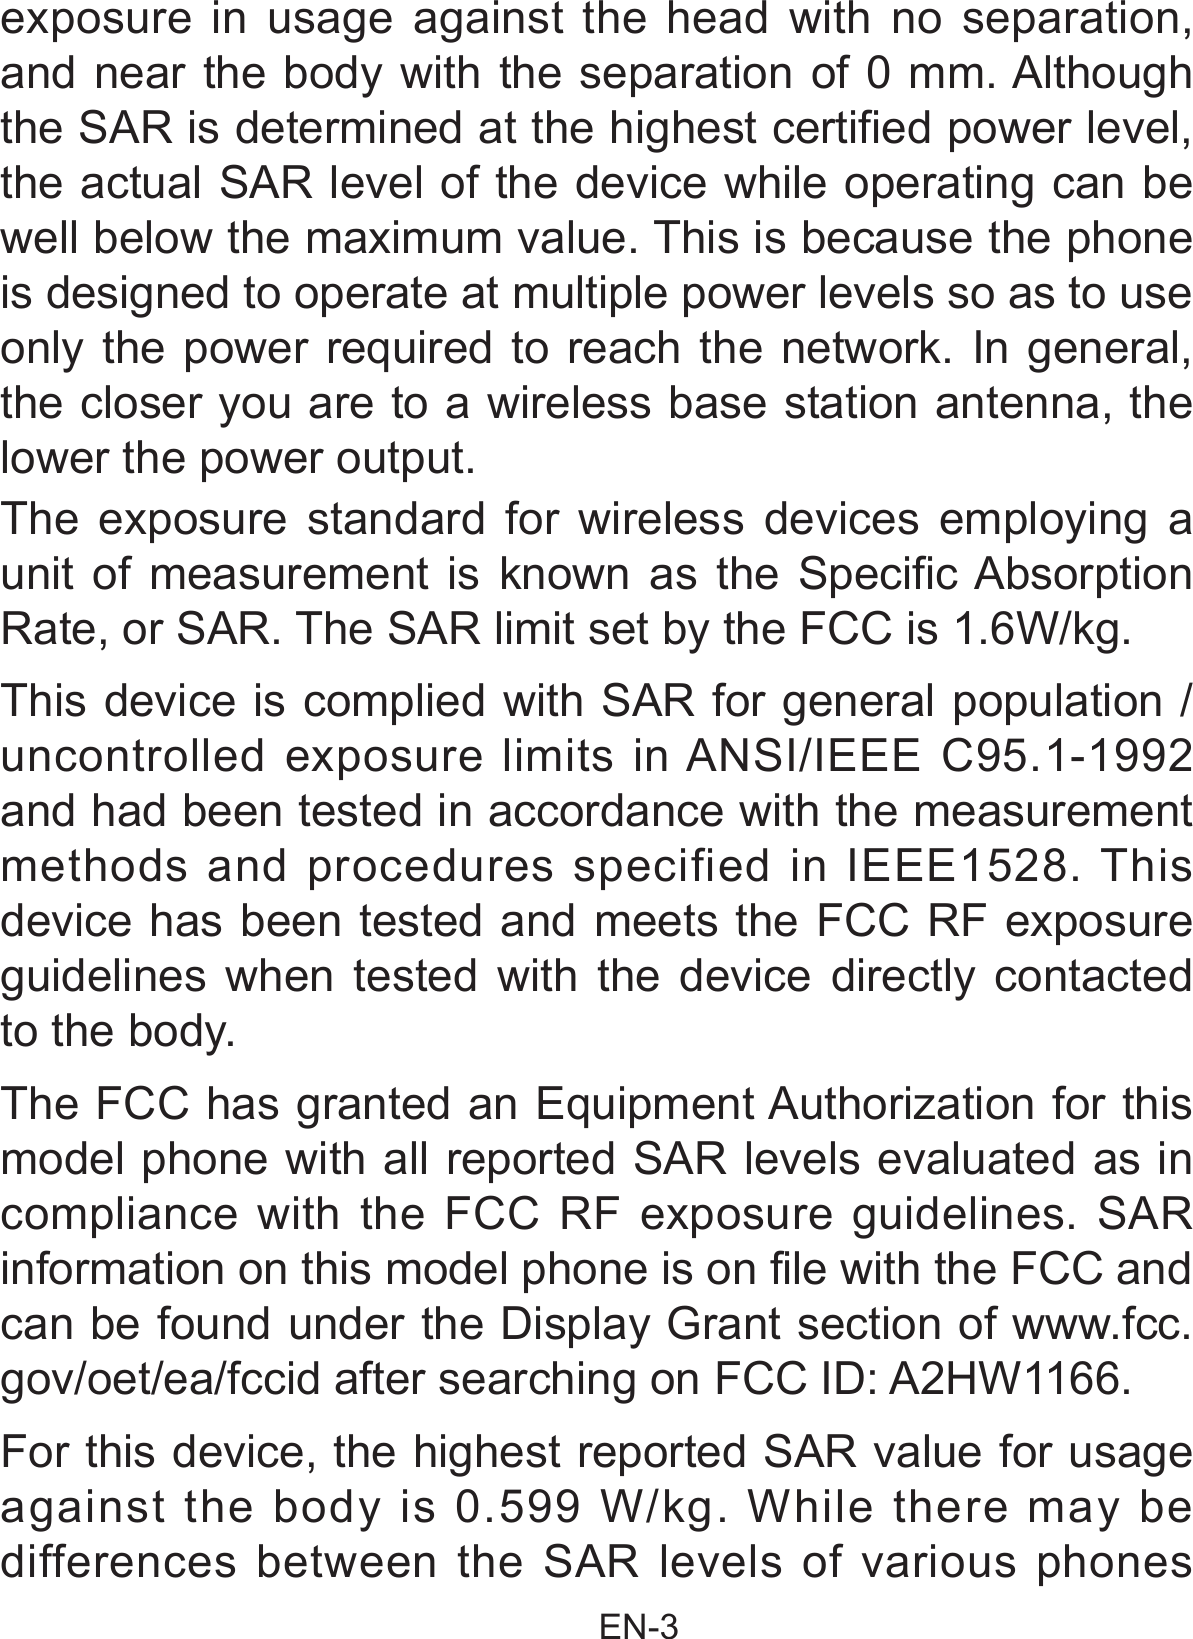                                                EN-3 exposure in usage against the head with no separation, and near the body with the separation of 0 mm. Although the SAR is determined at the highest certified power level, the actual SAR level of the device while operating can be well below the maximum value. This is because the phone is designed to operate at multiple power levels so as to use only the power required to reach the network. In general, the closer you are to a wireless base station antenna, the lower the power output. The exposure standard for wireless devices employing a unit of measurement is known as the Specific Absorption Rate, or SAR. The SAR limit set by the FCC is 1.6W/kg. This device is complied with SAR for general population /uncontrolled exposure limits in ANSI/IEEE C95.1-1992 and had been tested in accordance with the measurement methods and procedures specified in IEEE1528. This device has been tested and meets the FCC RF exposure guidelines when tested with the device directly contacted to the body.  The FCC has granted an Equipment Authorization for this model phone with all reported SAR levels evaluated as in compliance with the FCC RF exposure guidelines. SAR information on this model phone is on file with the FCC and can be found under the Display Grant section of www.fcc.gov/oet/ea/fccid after searching on FCC ID: A2HW1166.For this device, the highest reported SAR value for usage against the body is 0.599 W/kg. While there may be differences between the SAR levels of various phones 